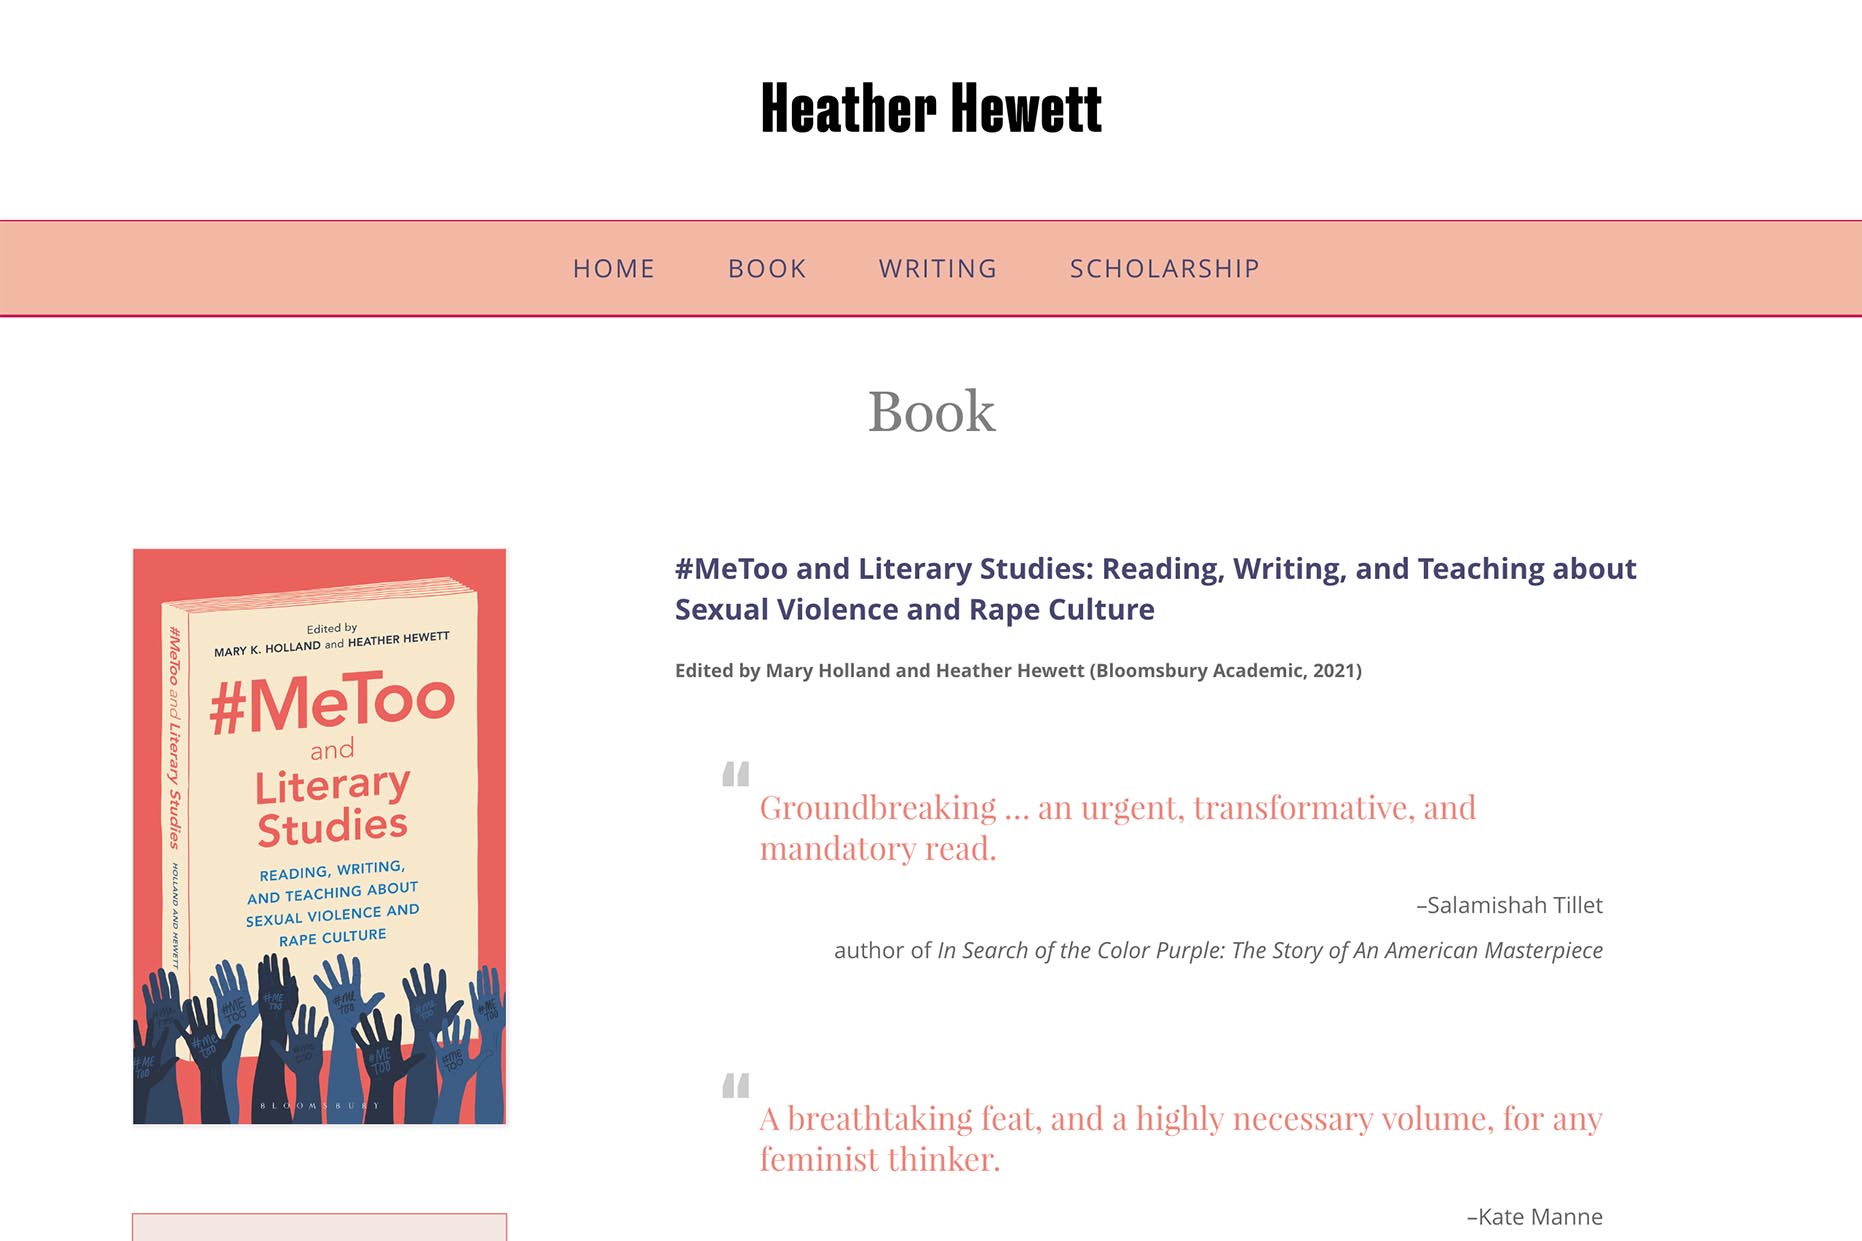 Bespoke website design for an academic, author and activist - Heather Hewett. The website design echoes elements from the author's published book cover.